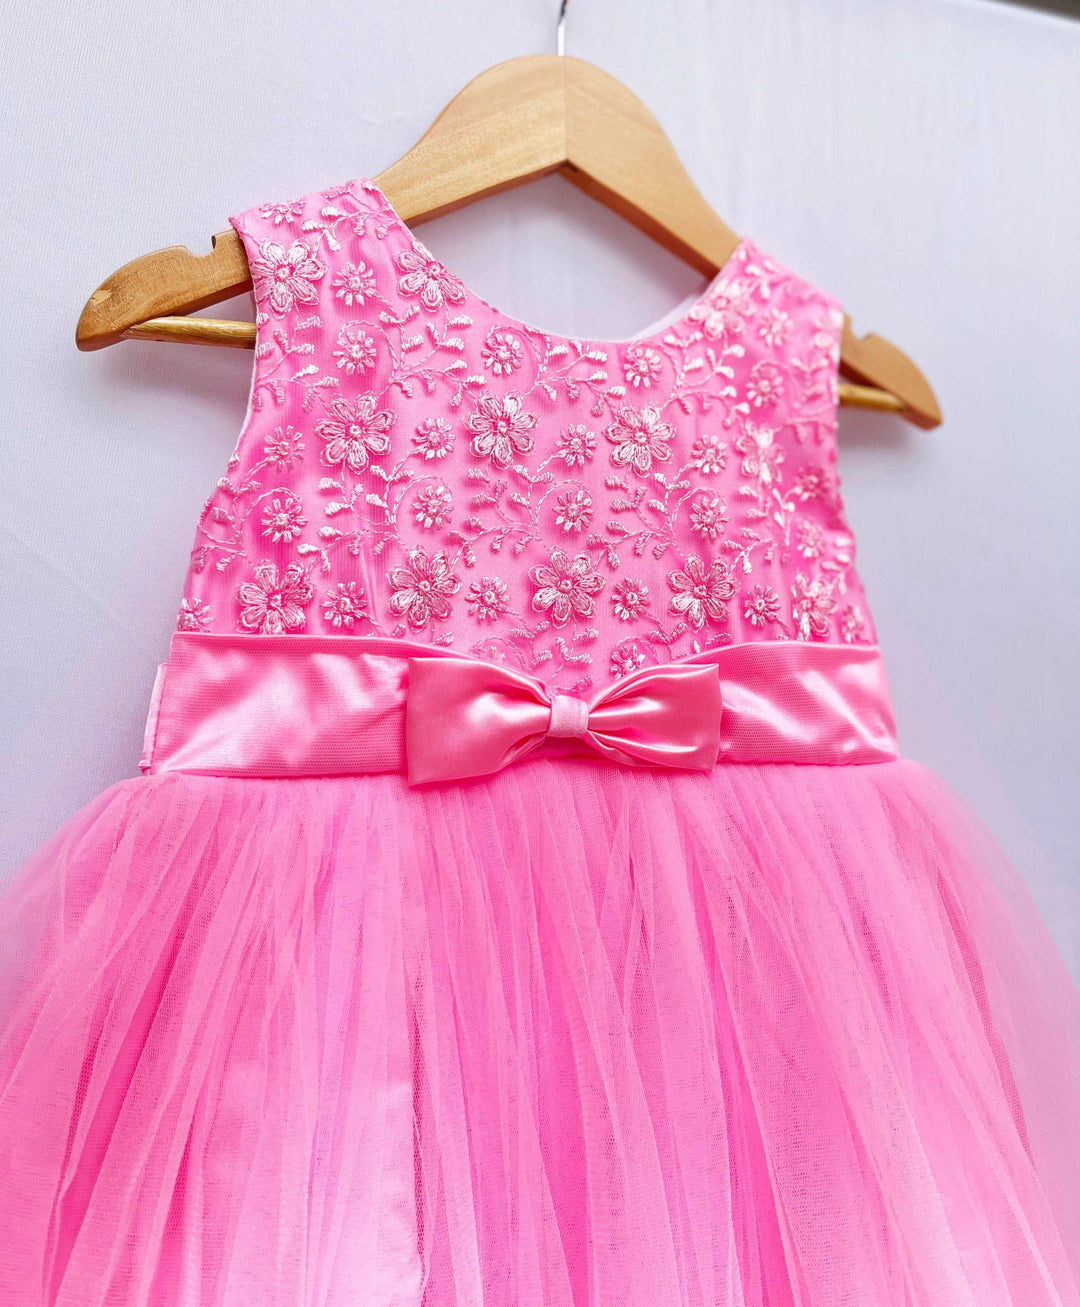 Baby Pink Designer Layered Frock
Fabric: Babypink mono net with premium same colour threadwork detailing on the yoke portion  Beautifully designed outfit for Baby girls with smooth lining for comfo